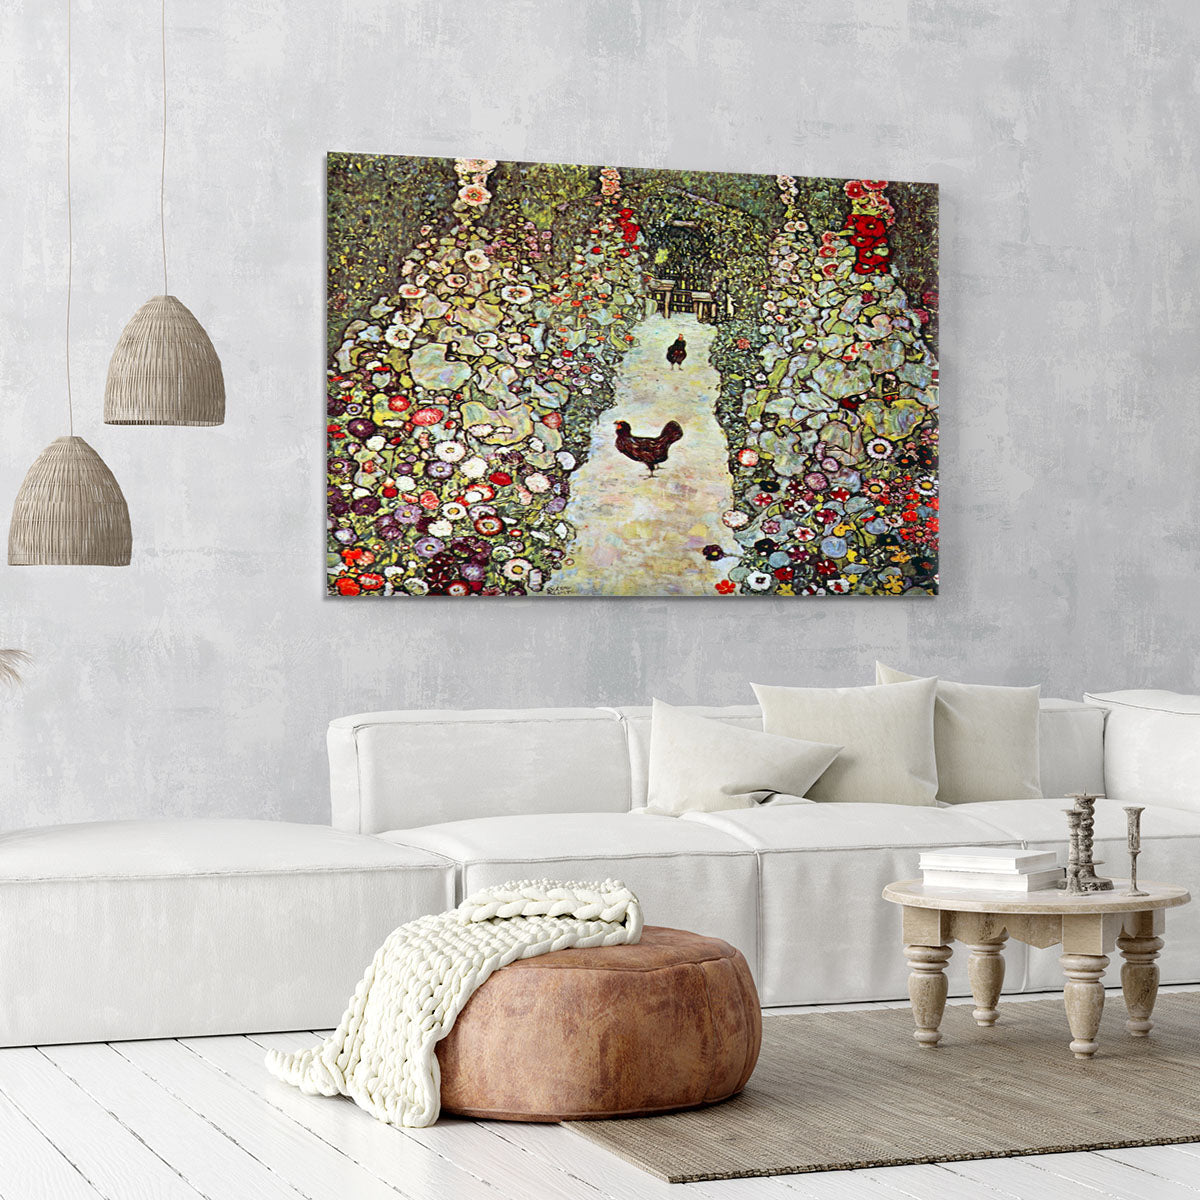 Garden Path with Chickens by Klimt Canvas Print or Poster - Canvas Art Rocks - 6